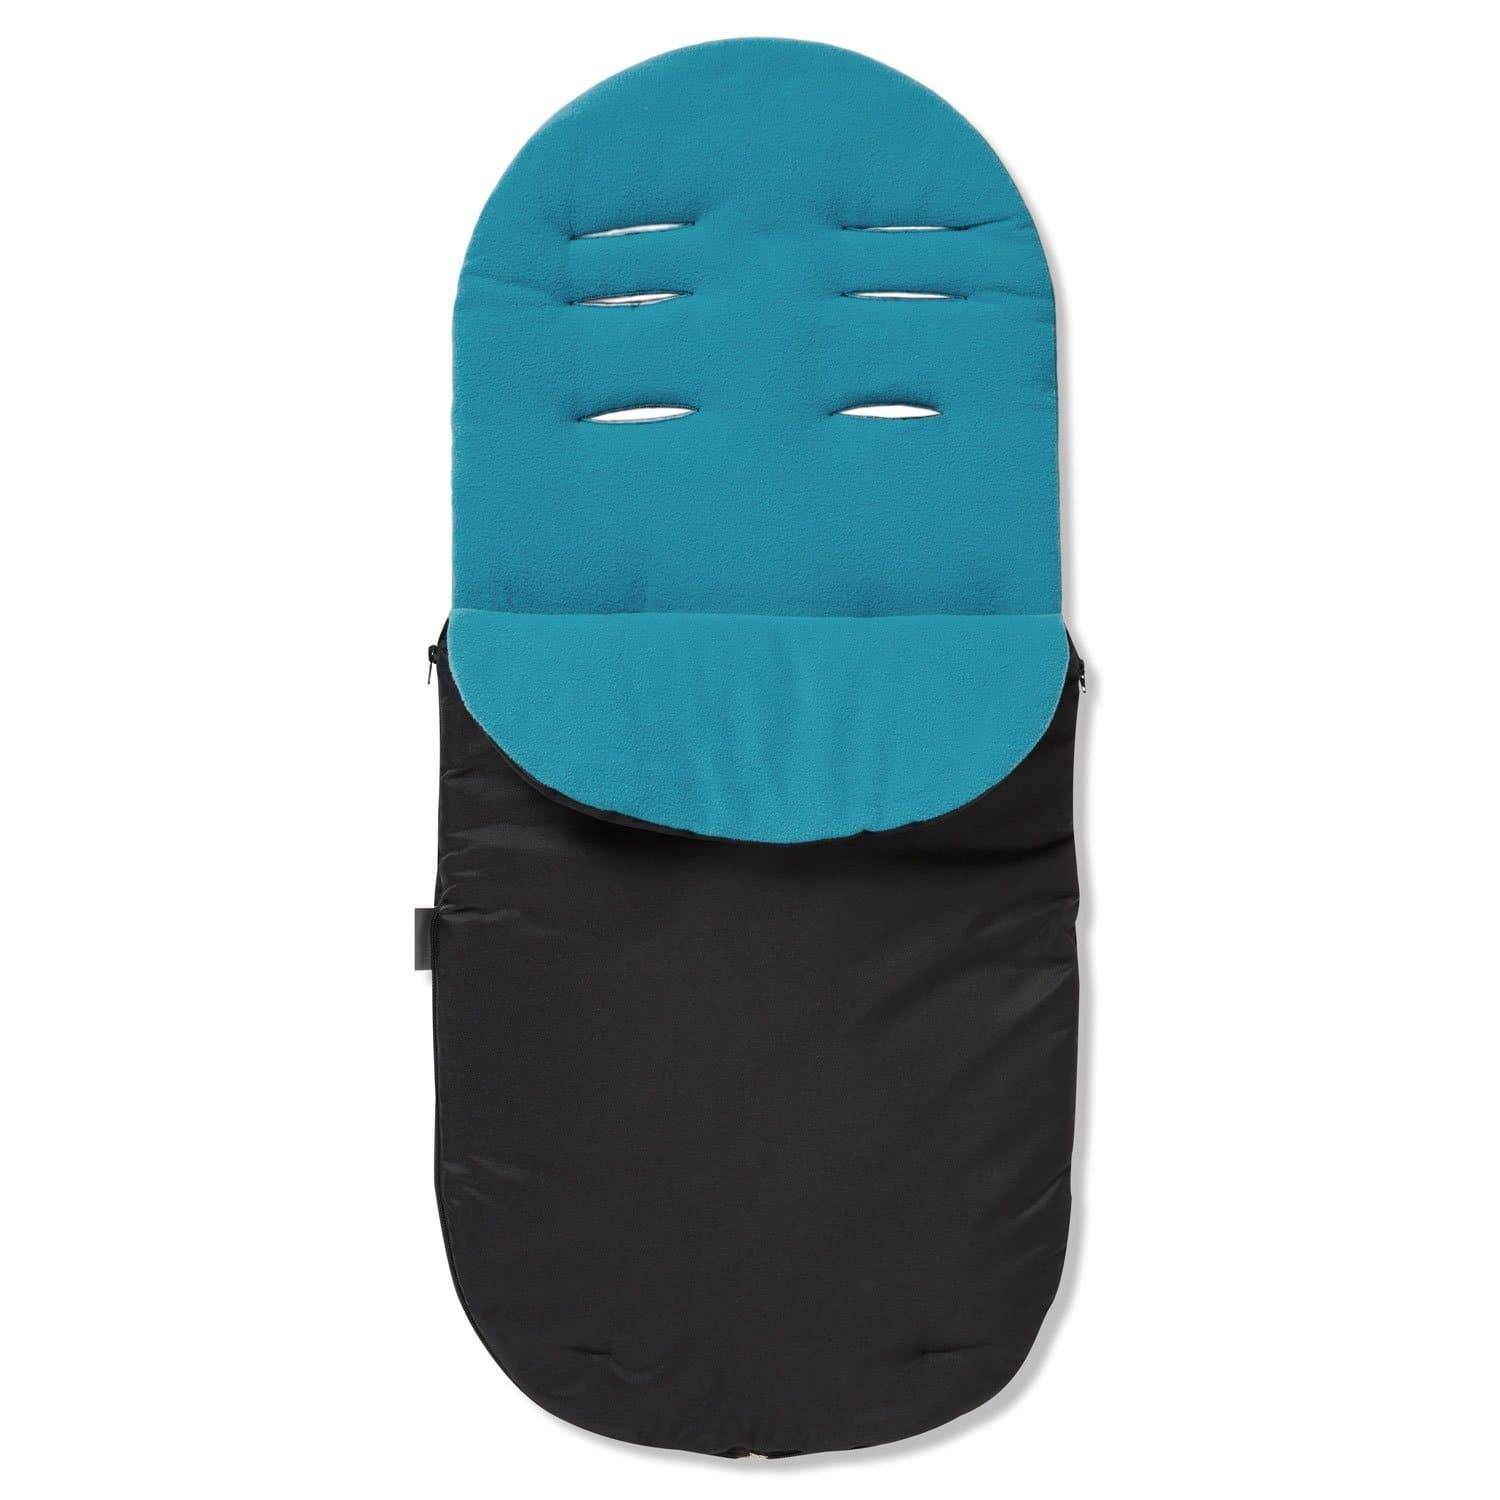 Footmuff / Cosy Toes Compatible with Kinderkraft - Turquoise / Fits All Models | For Your Little One